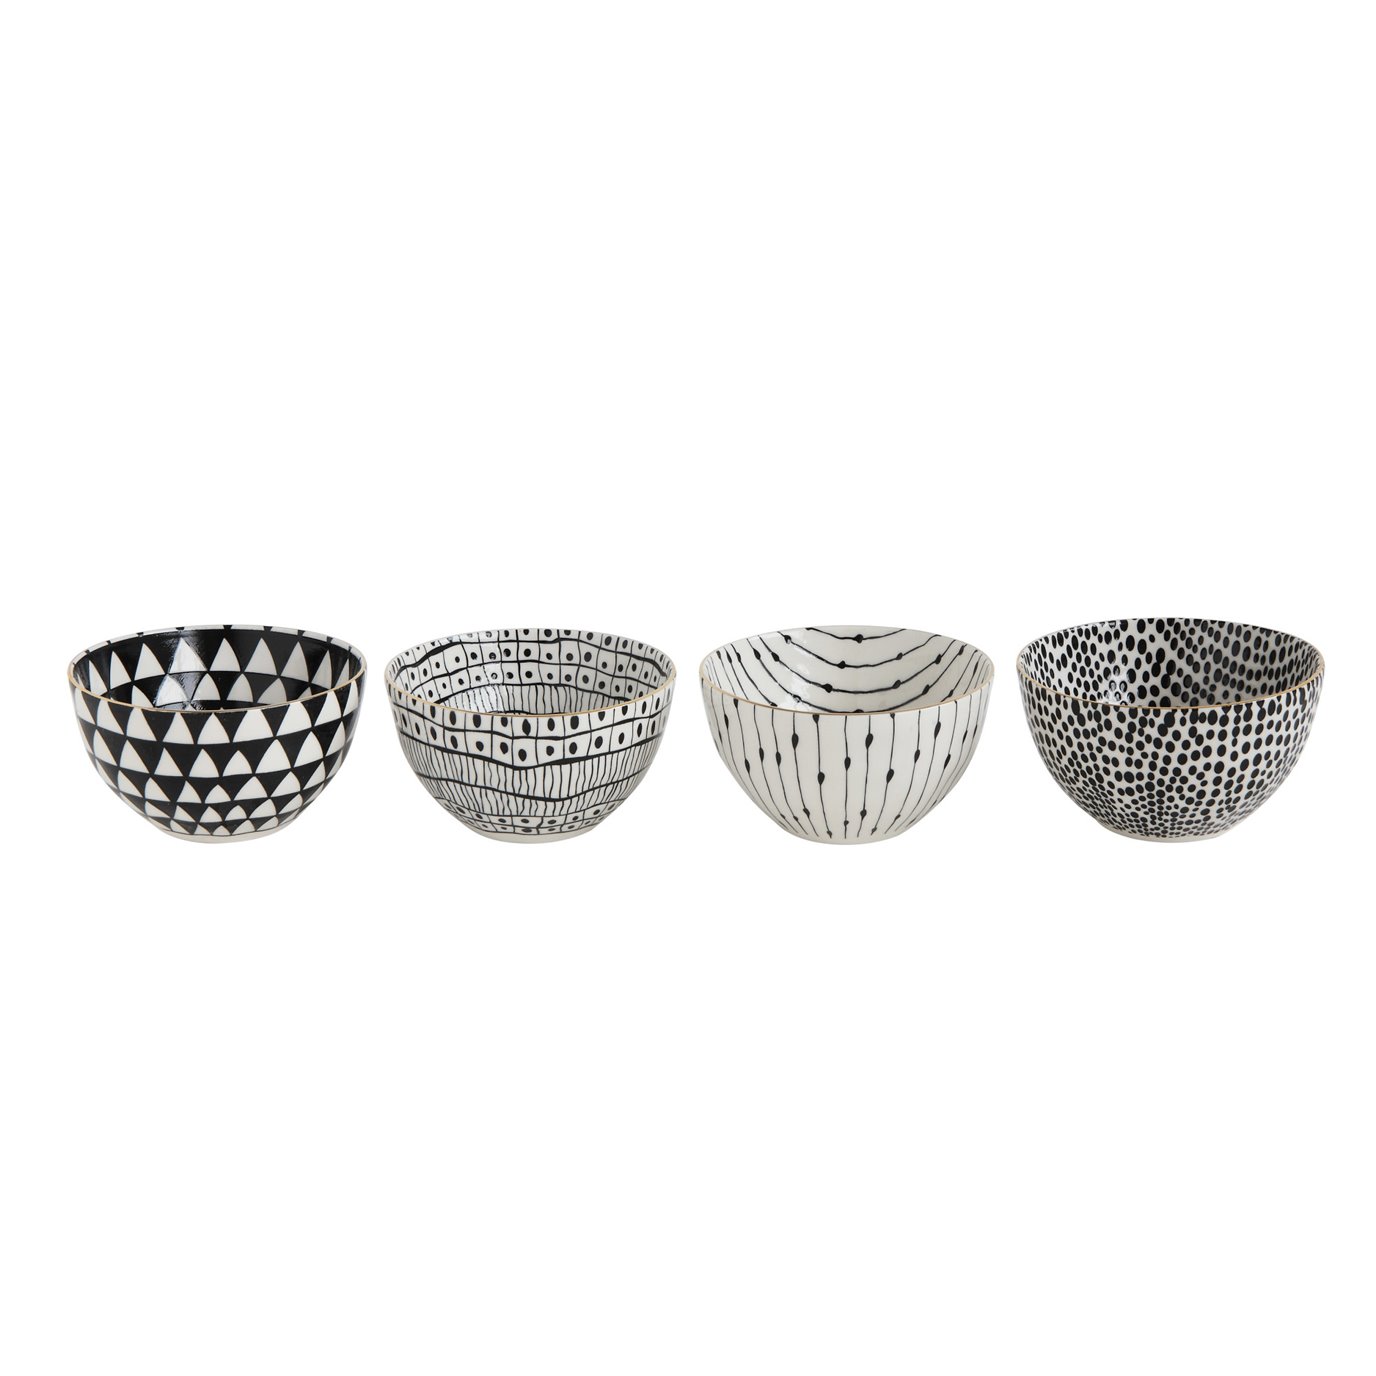 White & Black Bowls with Varying Designs (Set of 4 Designs)